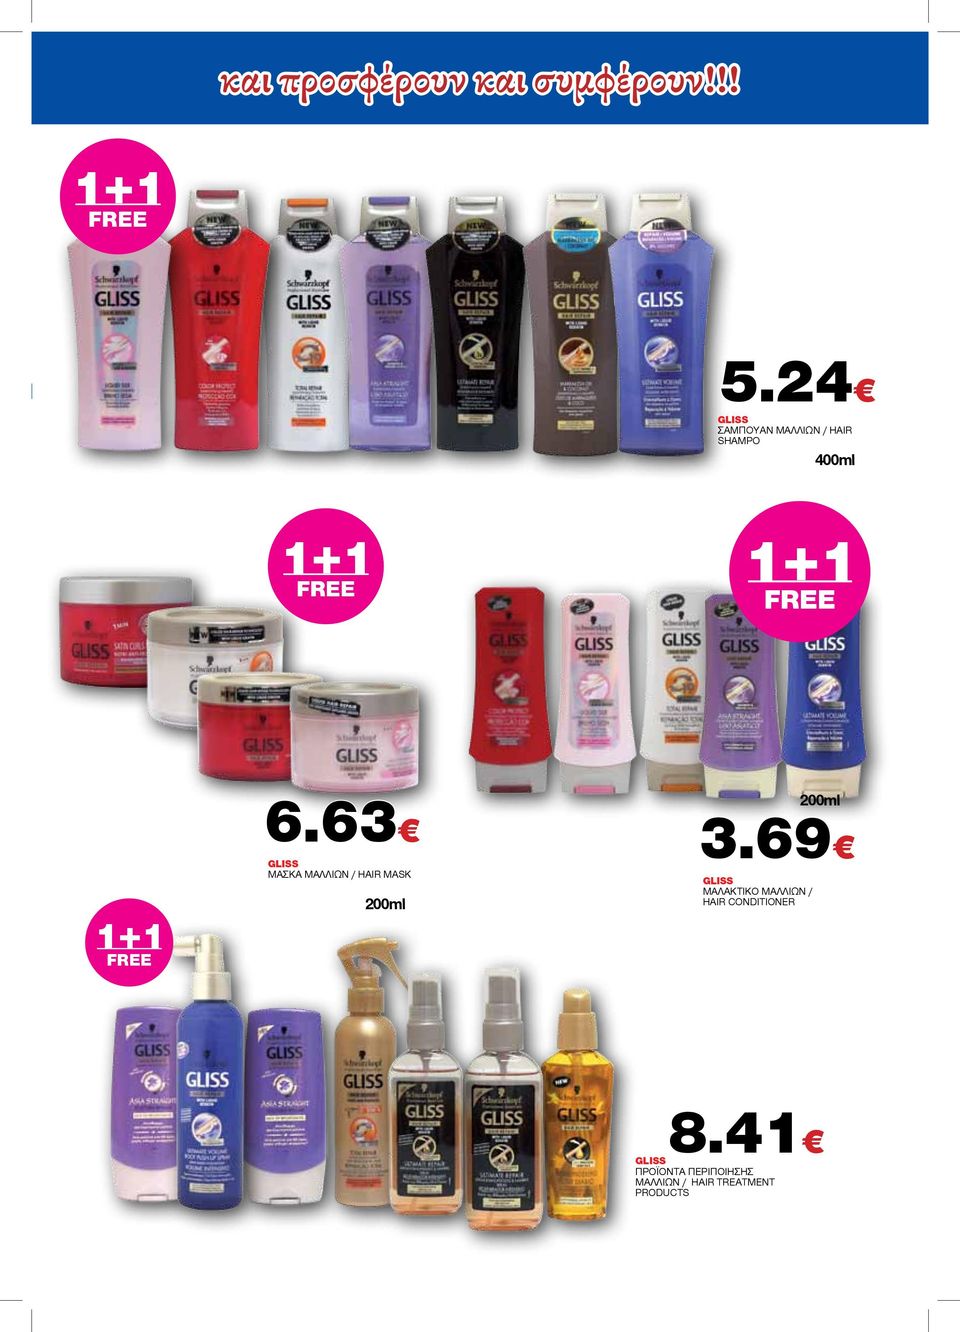 63 GLISS ΜΑΣΚΑ ΜΑΛΛΙΩΝ / HAIR MASK 200ml 200ml 3.